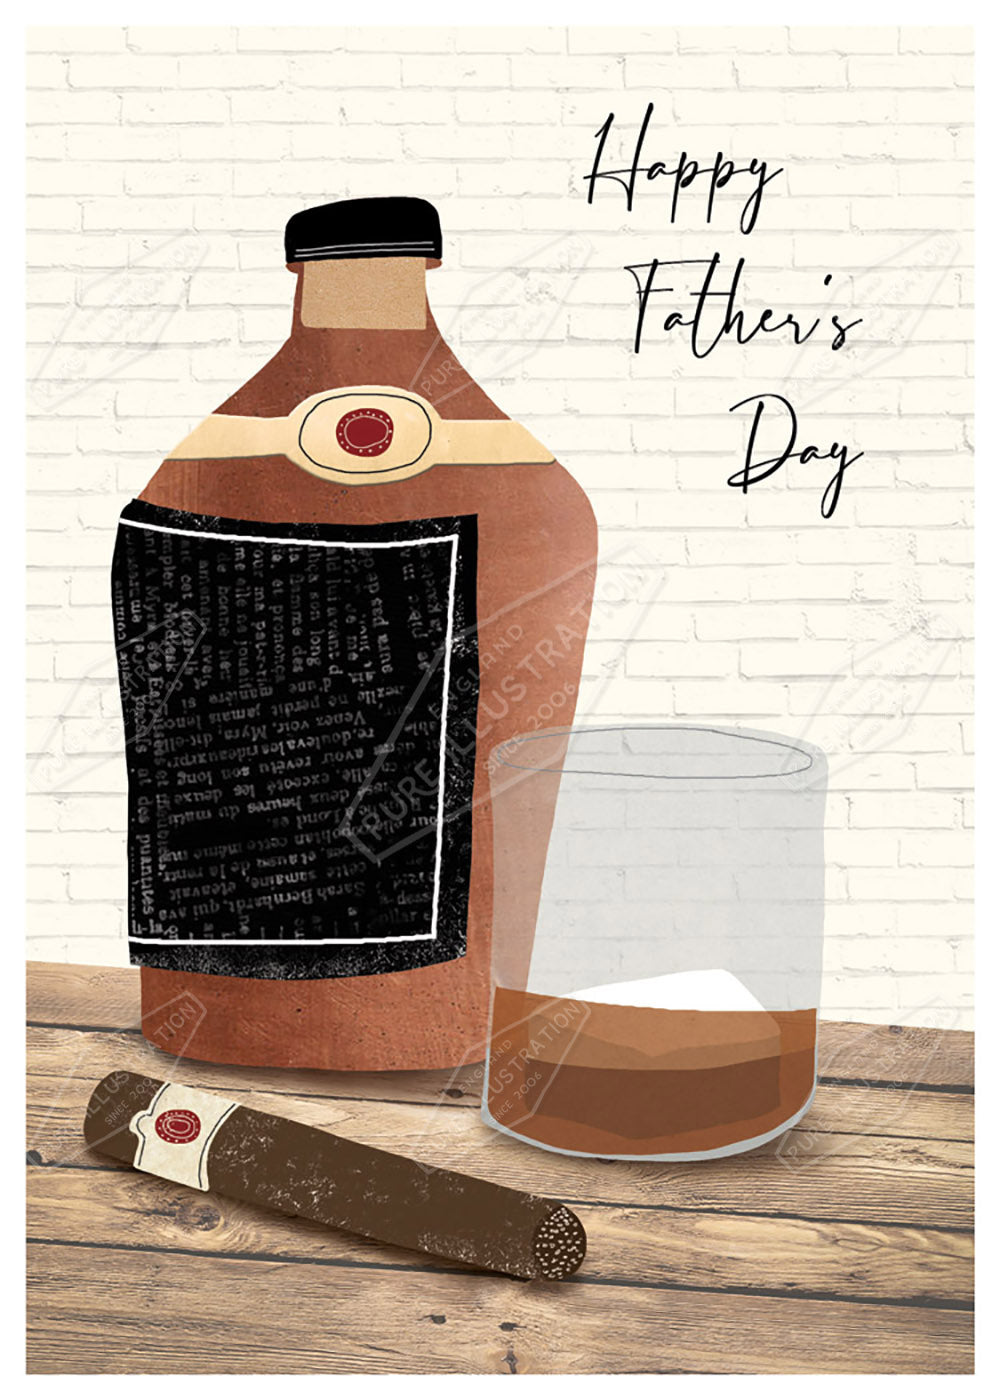 Father's Day Whisky & Cigars Illustration by Cory Reid for Pure Art Licensing Agency and Surface Design Studio